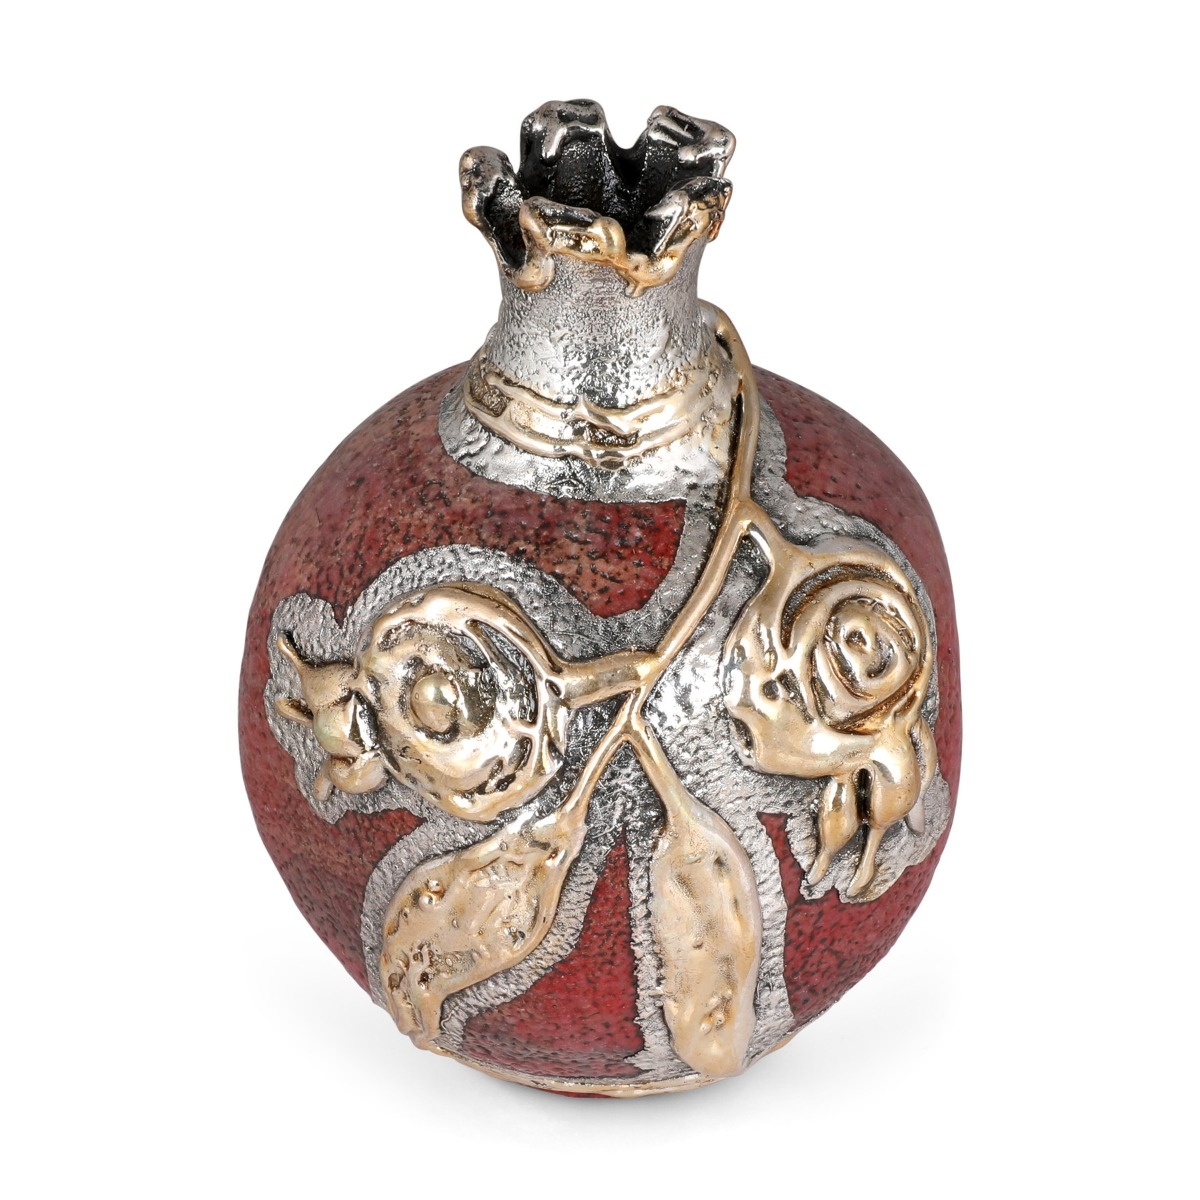 Handmade Ceramic Pomegranate with 925 Sterling Silver Decoration - 1